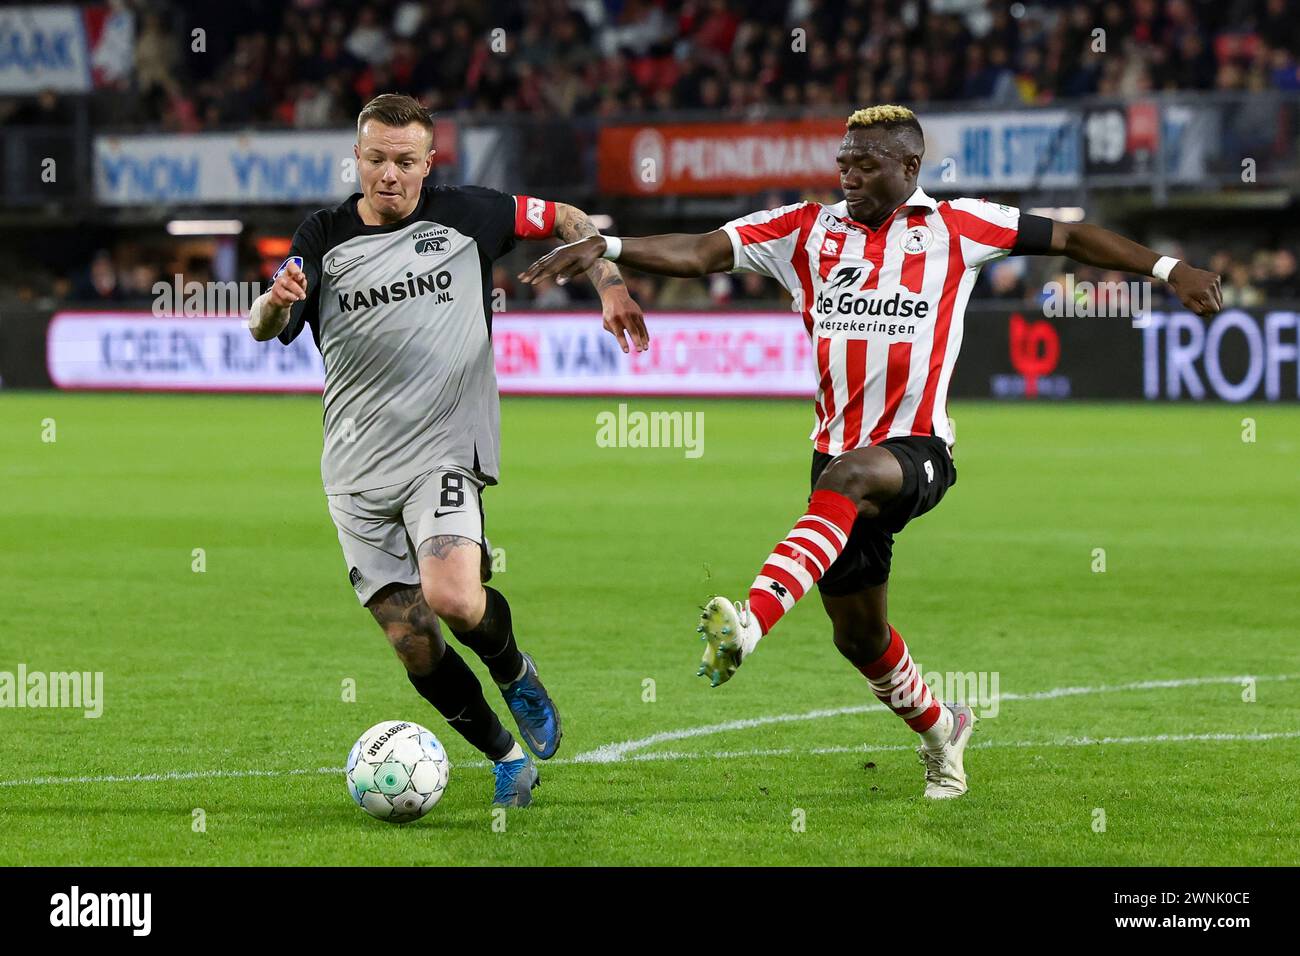 ROTTERDAM, NETHERLANDS - MARCH 2: Jordy Clasie (AZ Alkmaar) and Joshua Kitolano (Sparta Rotterdam) Battles for the ball during the Eredivisie match of Stock Photo